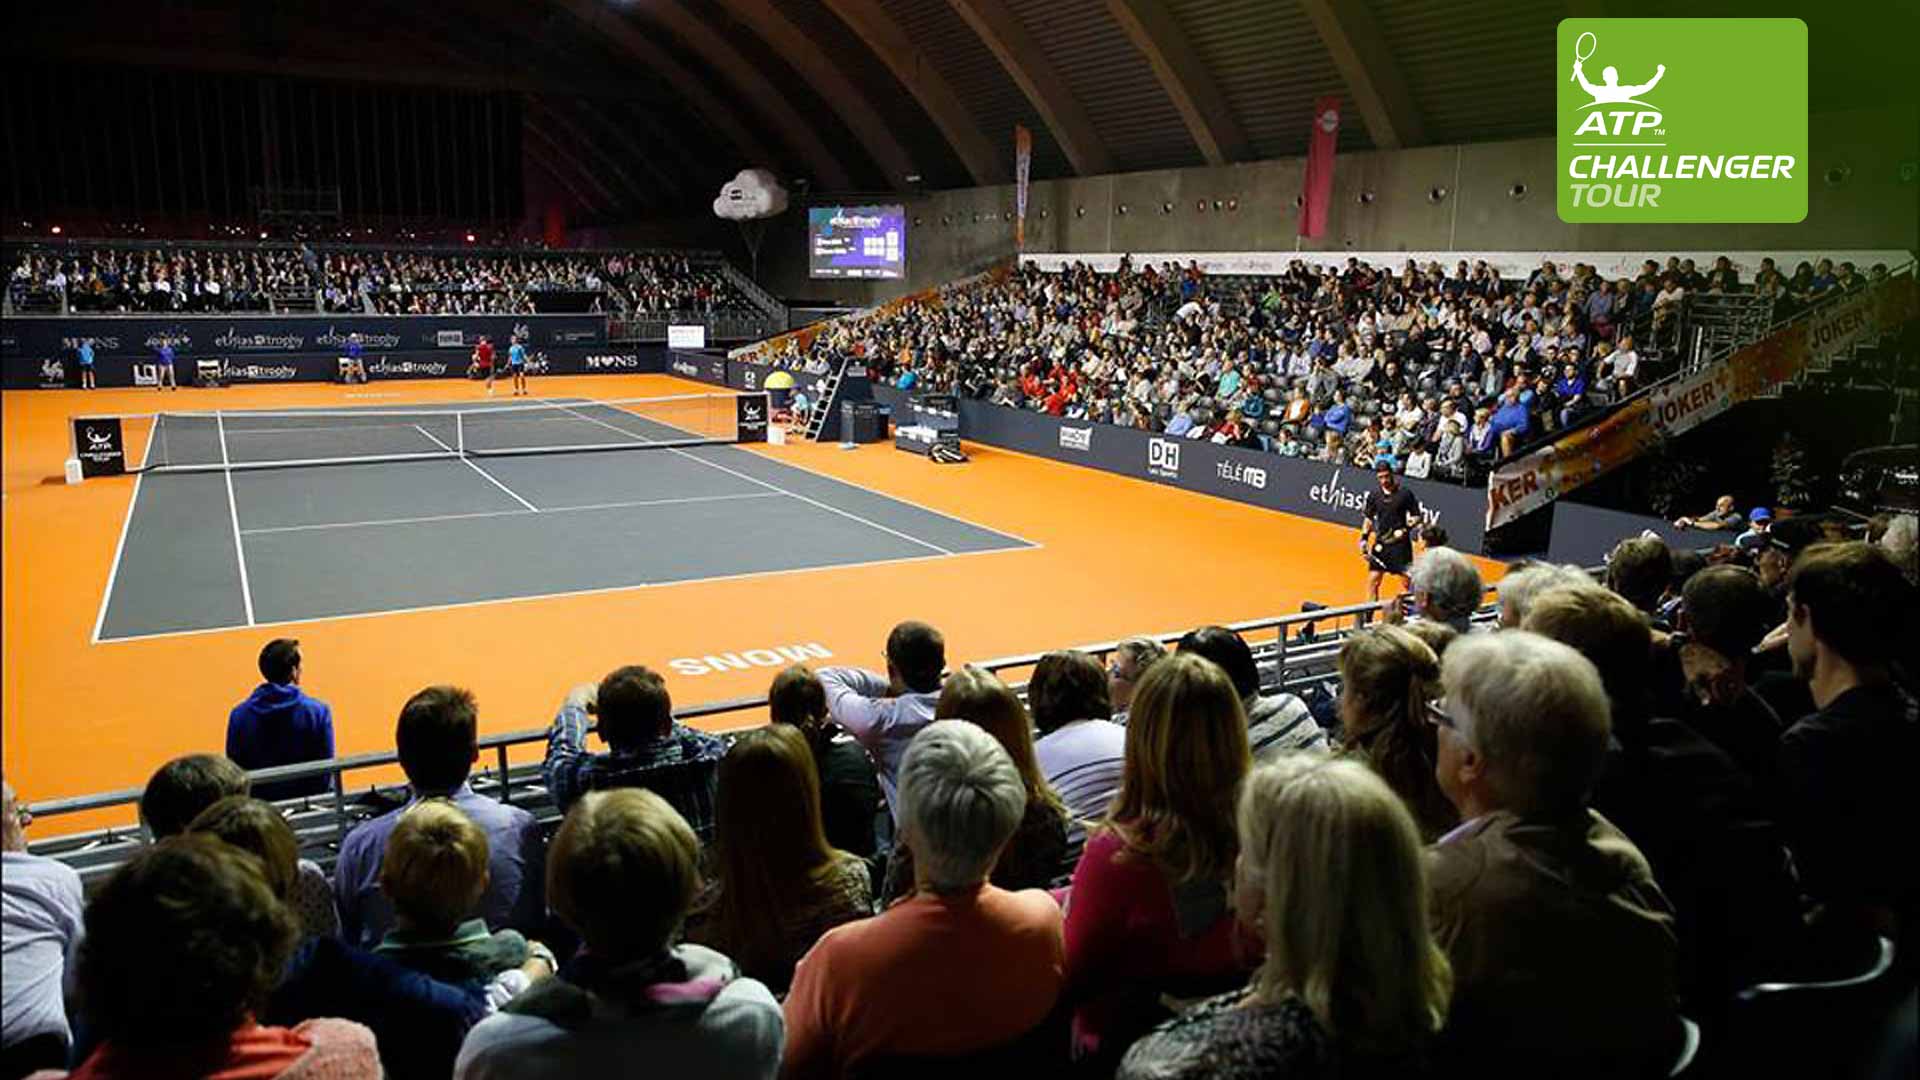 The ATP Challenger Tour event in Mons enjoys packed crowds each year.